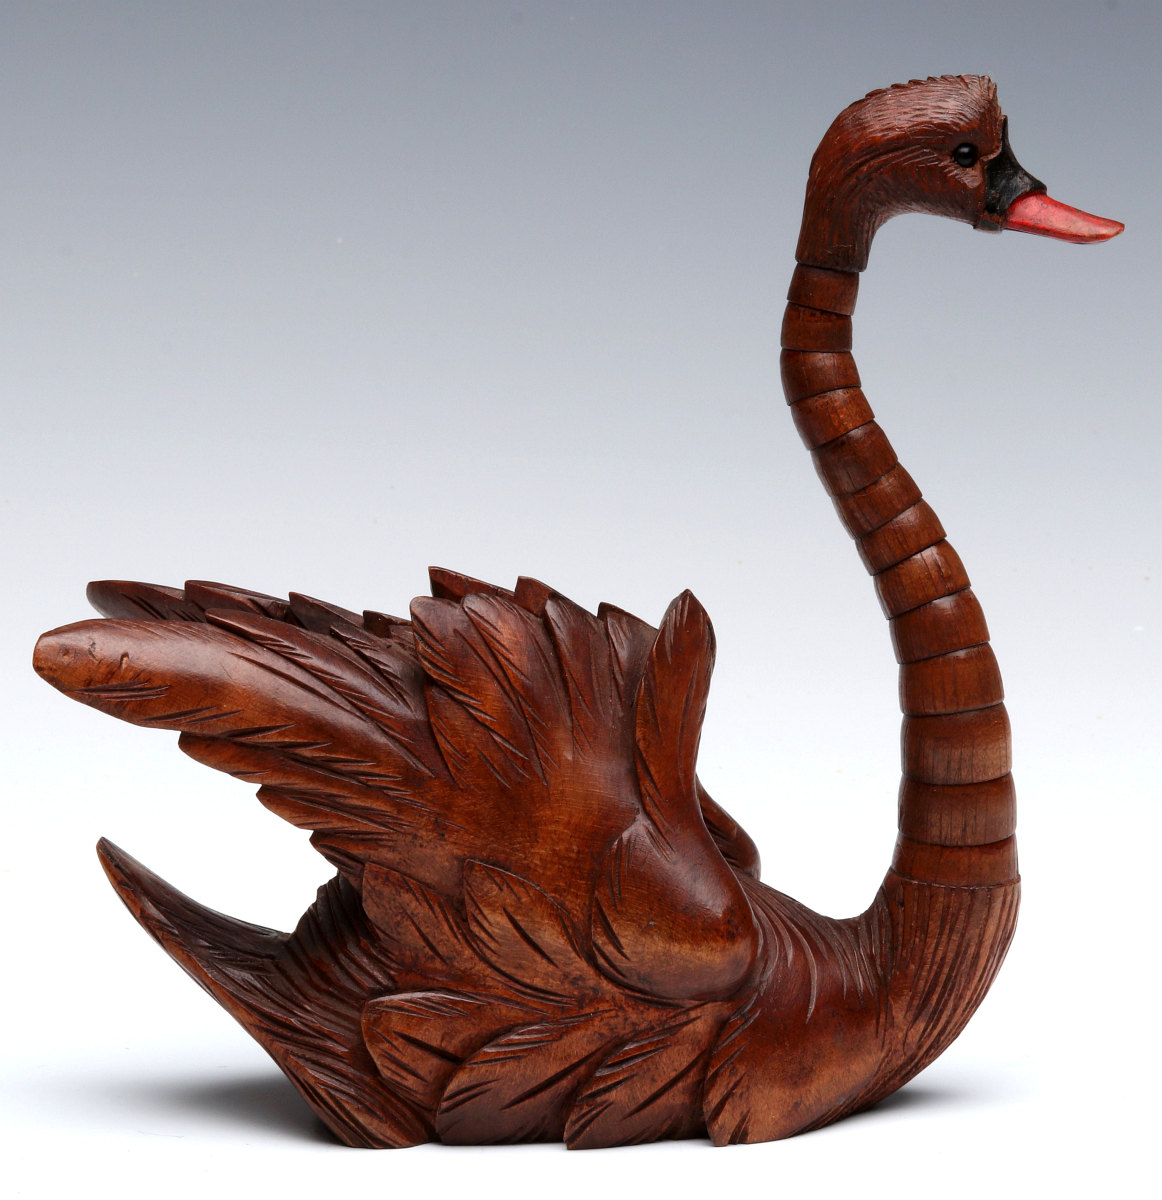 ELABORATE CARVING OF A SWAN WITH ARTICULATED NECK